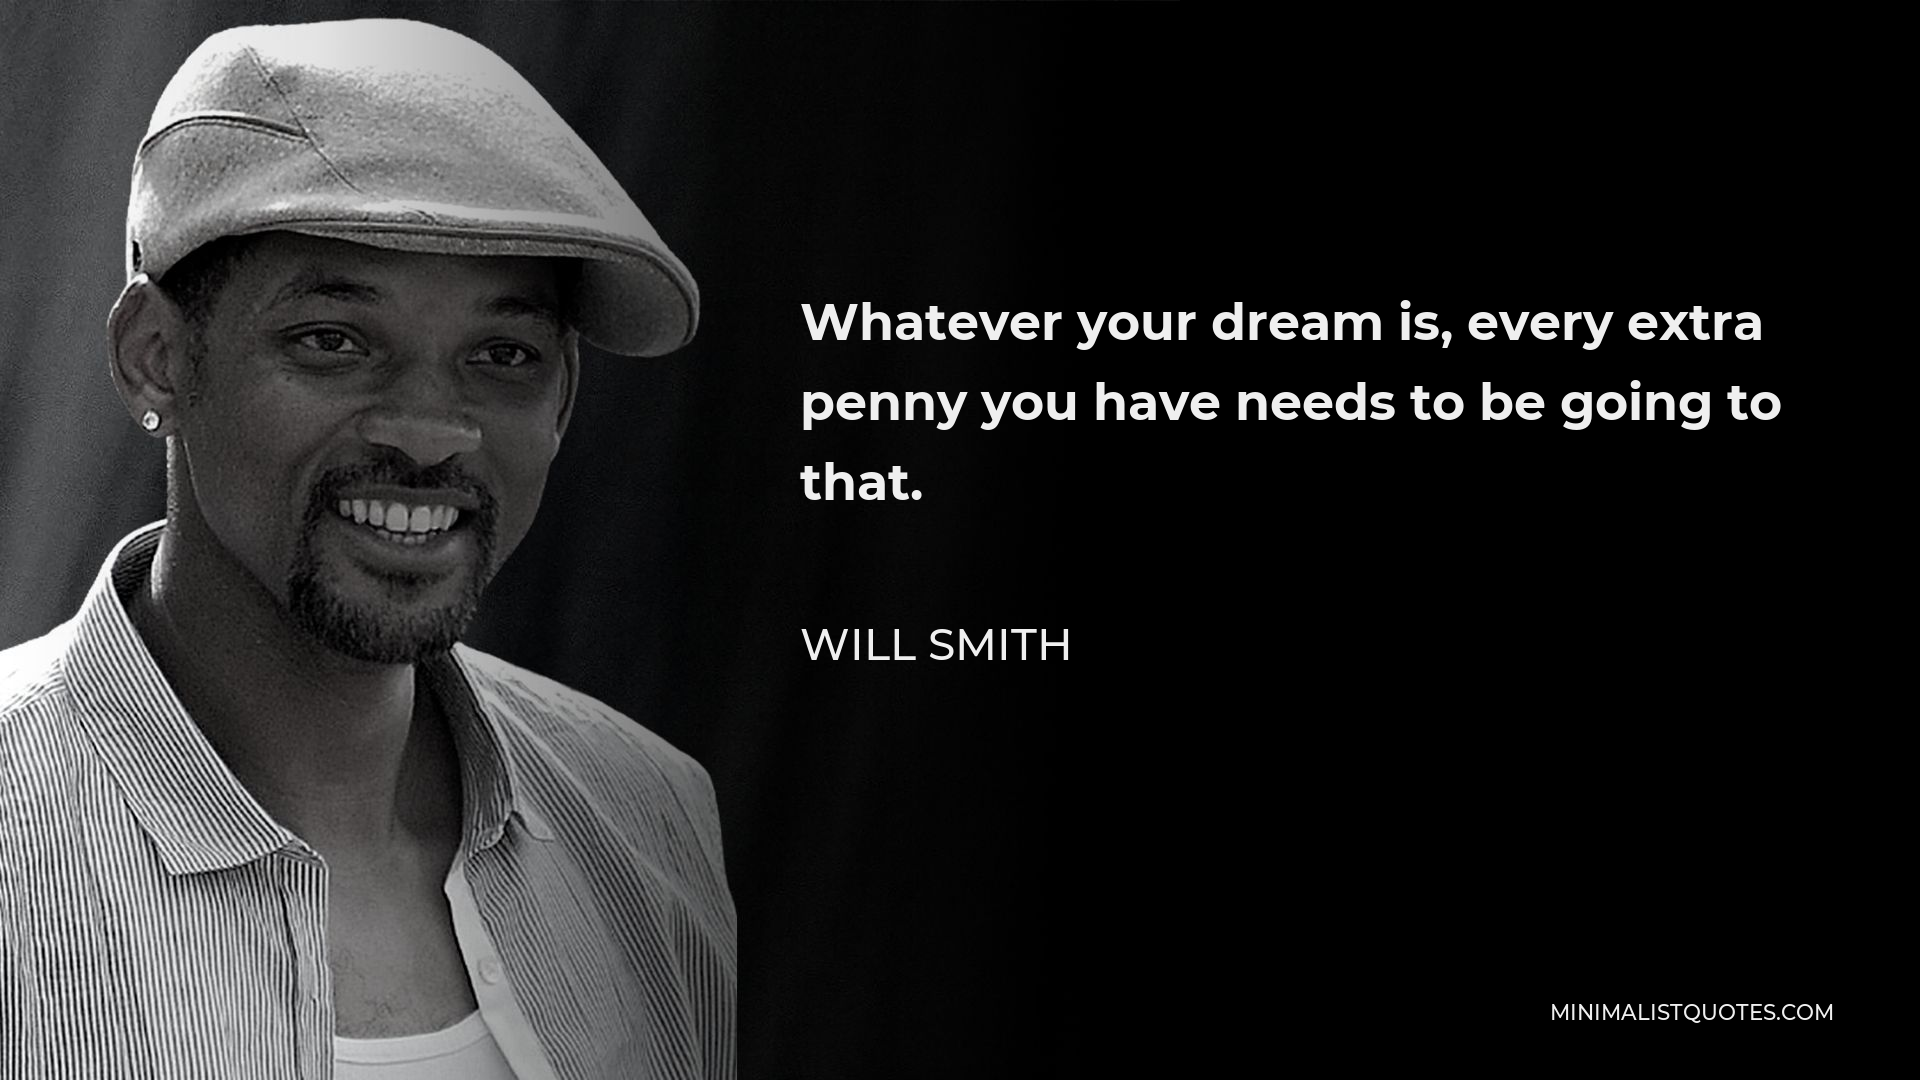 Will Smith Quote - Whatever your dream is, every extra penny you have needs to be going to that.